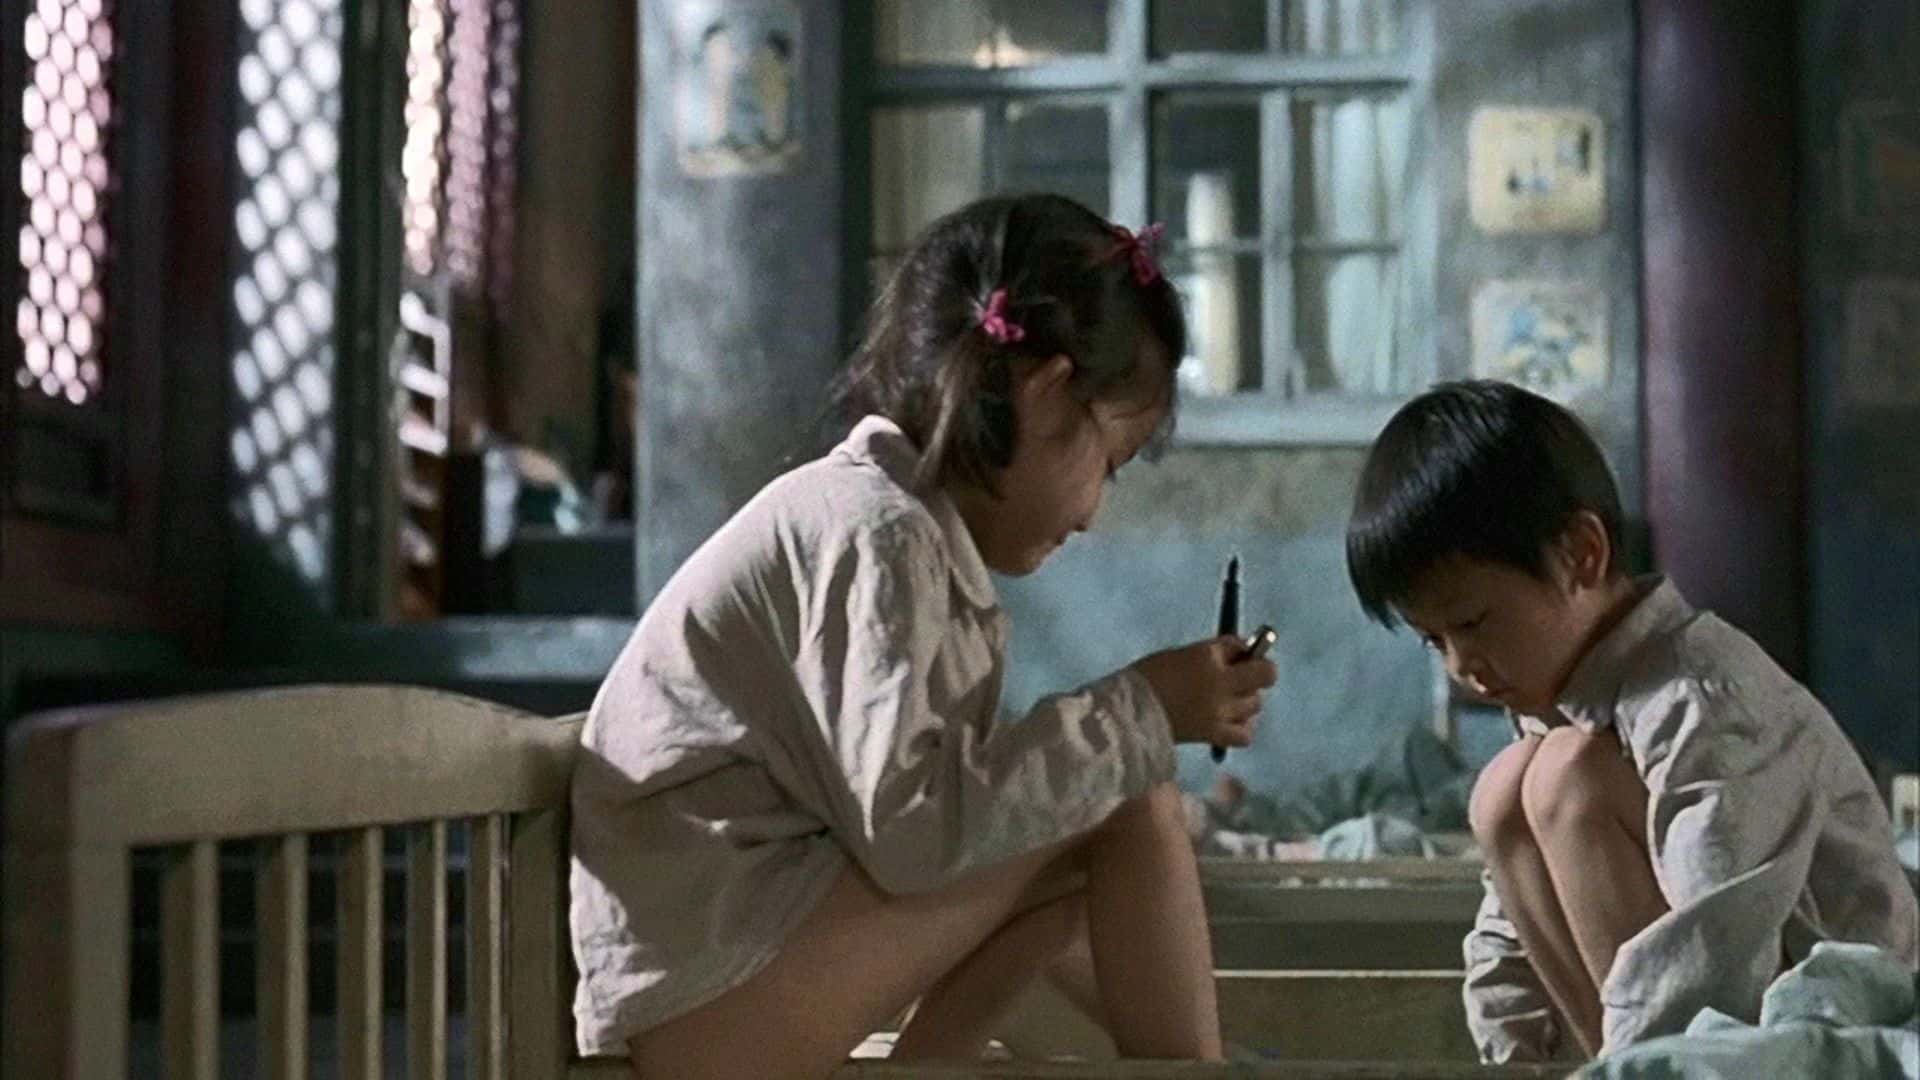 Little Red Flowers (2006) by Zhang Yuan